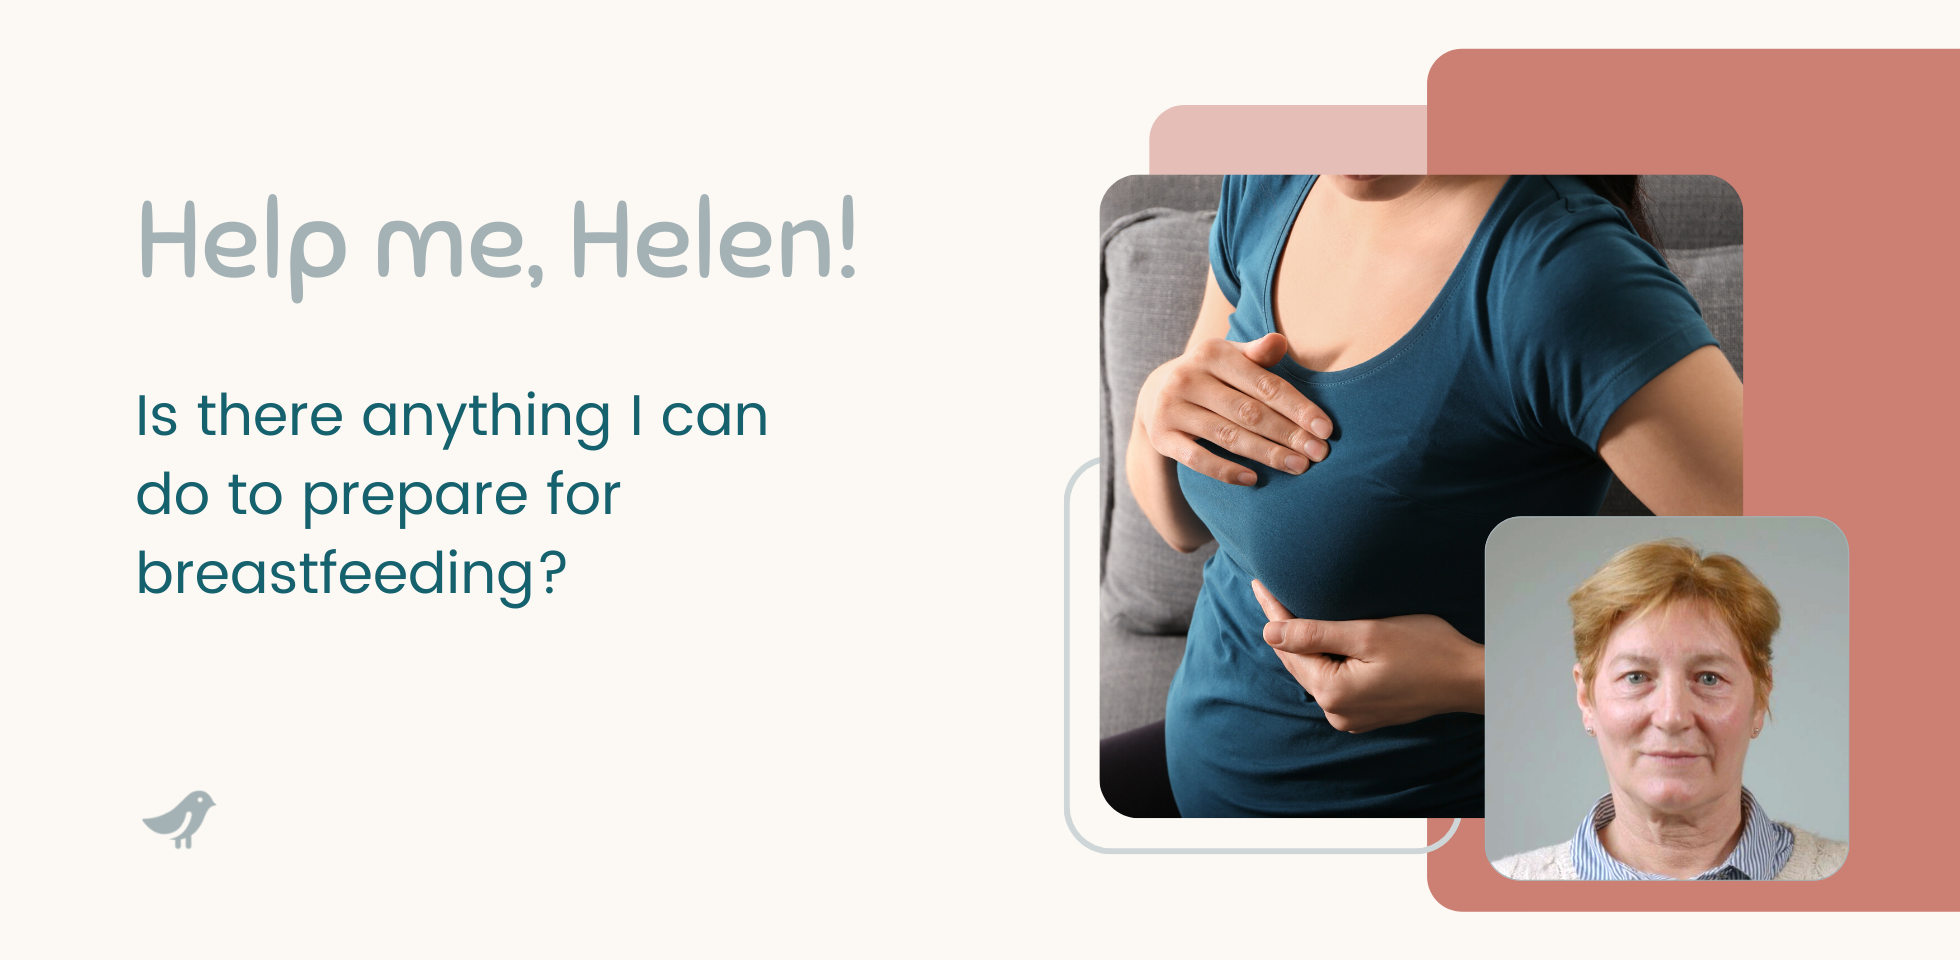 Help Me, Helen! Is there anything I can do to prepare for breastfeeding?